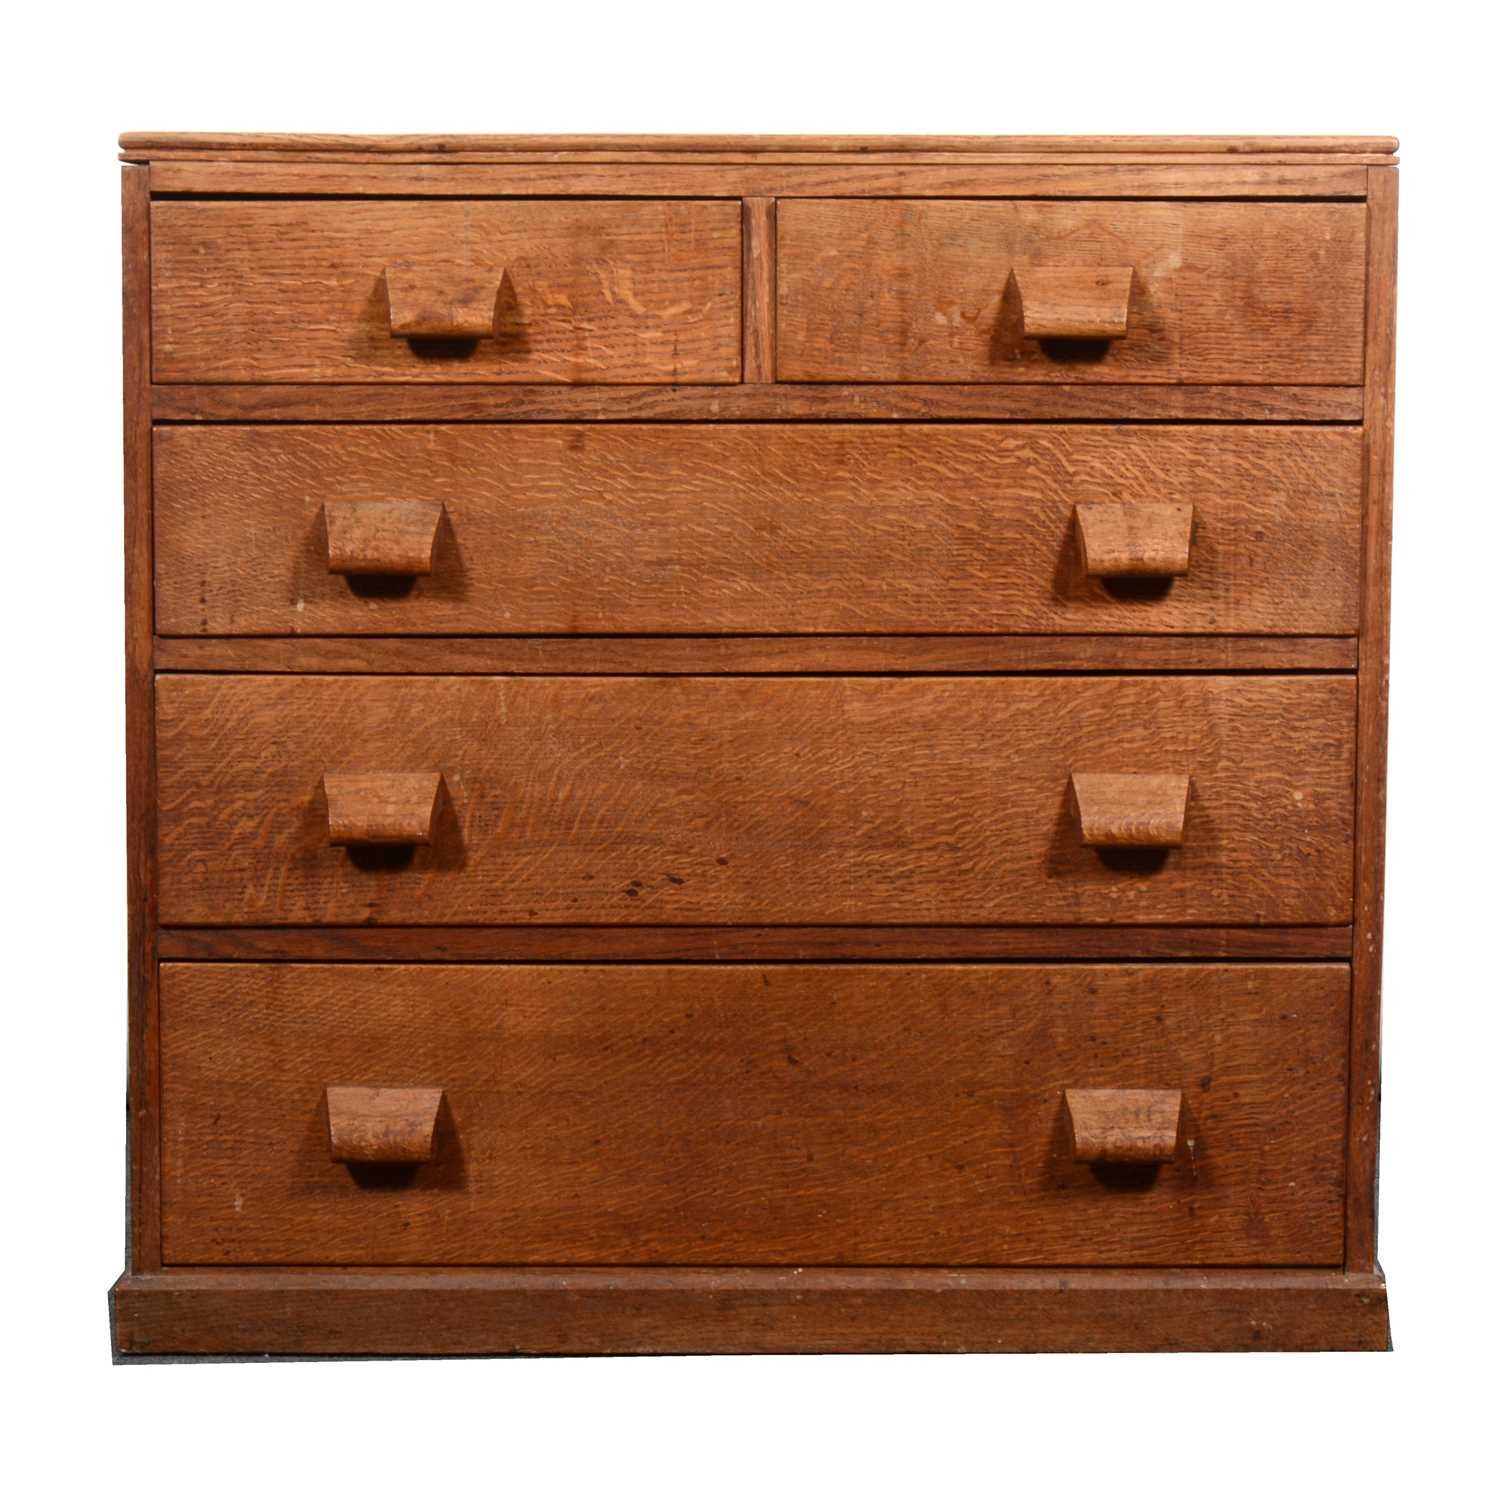 Lot 532 - A small Arts and Crafts oak chest of drawers